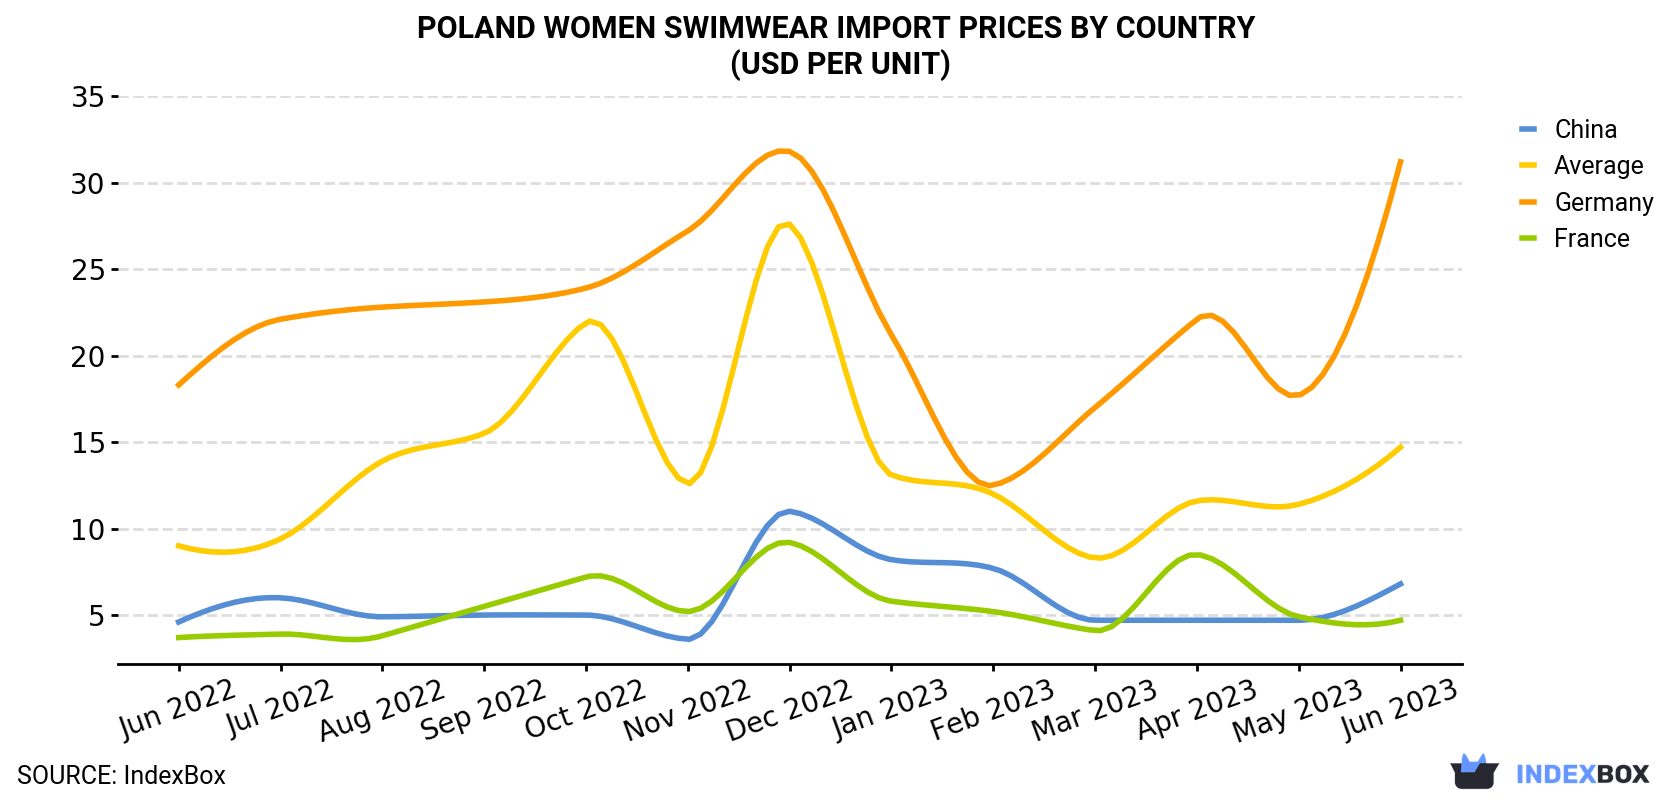 Poland Women Swimwear Import Prices By Country (USD Per Unit)